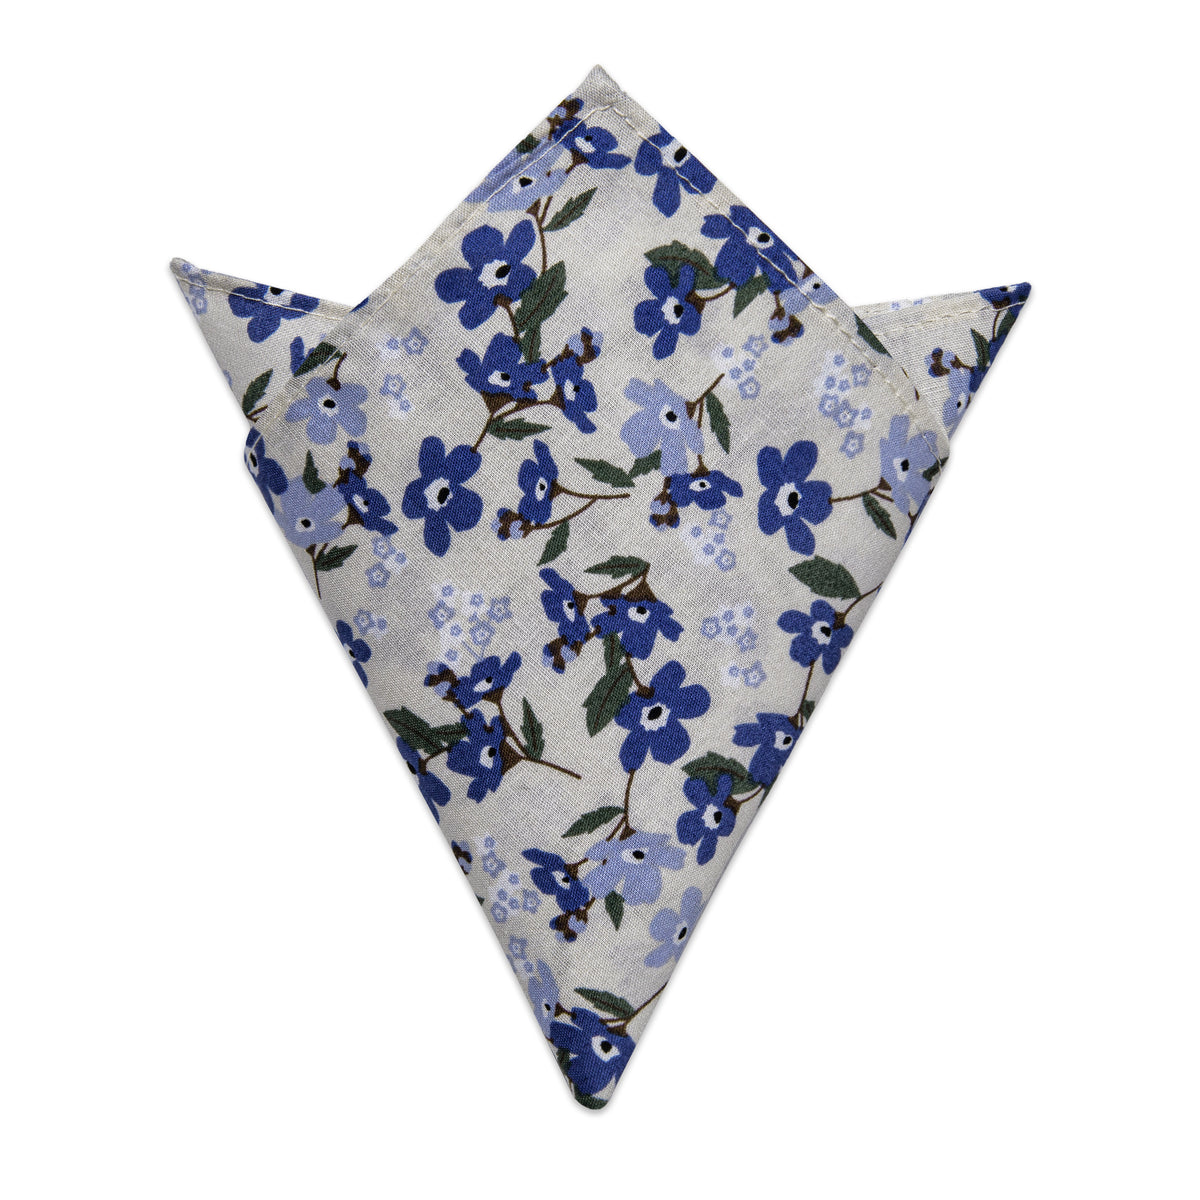 YourTies White Tie Floral Wedding Blue Flower Printed Tie Set and Clip